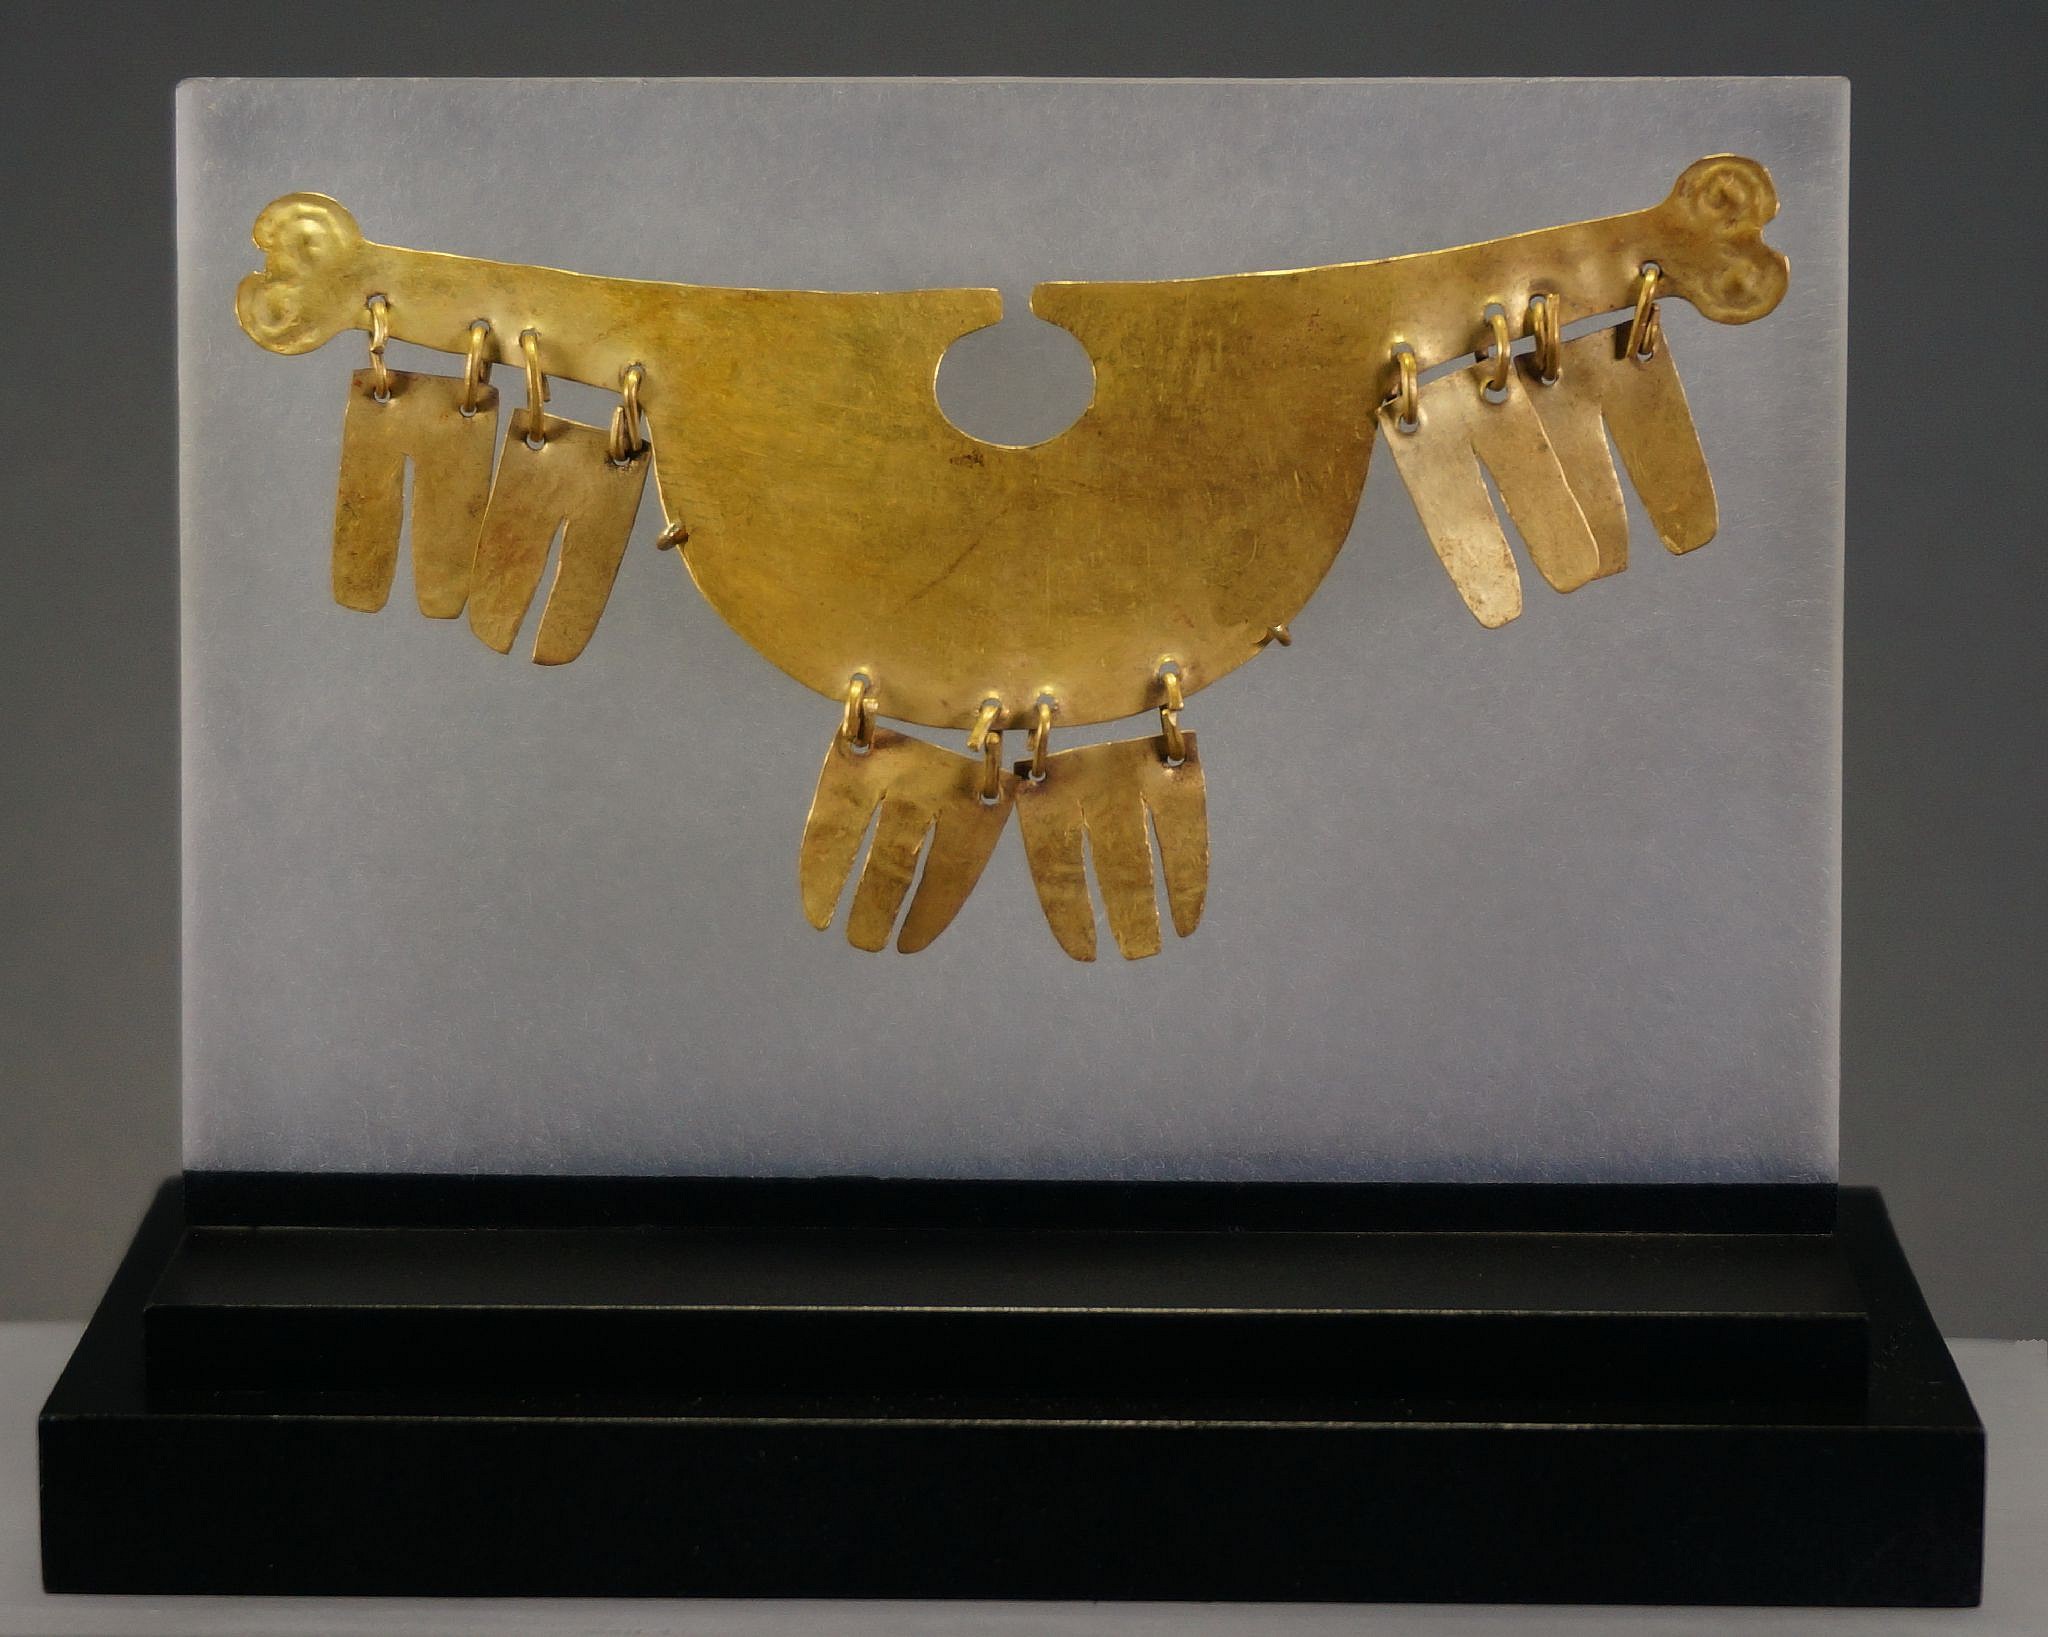 Peru, Salinar-Early Moche Gold Nose Ornament With Dangles in the Form of Bird Feathers
Unusual and rare nose ornament from the Salinar culture with stylized bird heads at each end and six dangles imitating feathers. A similar example is illustrated in "Oro del antiguo Peru" by JosÃ© de Lavalle (1992: pl. 94).
Media: Metal
Dimensions: Width 4" x Height 1 3/4"
Price Upon Request
96164